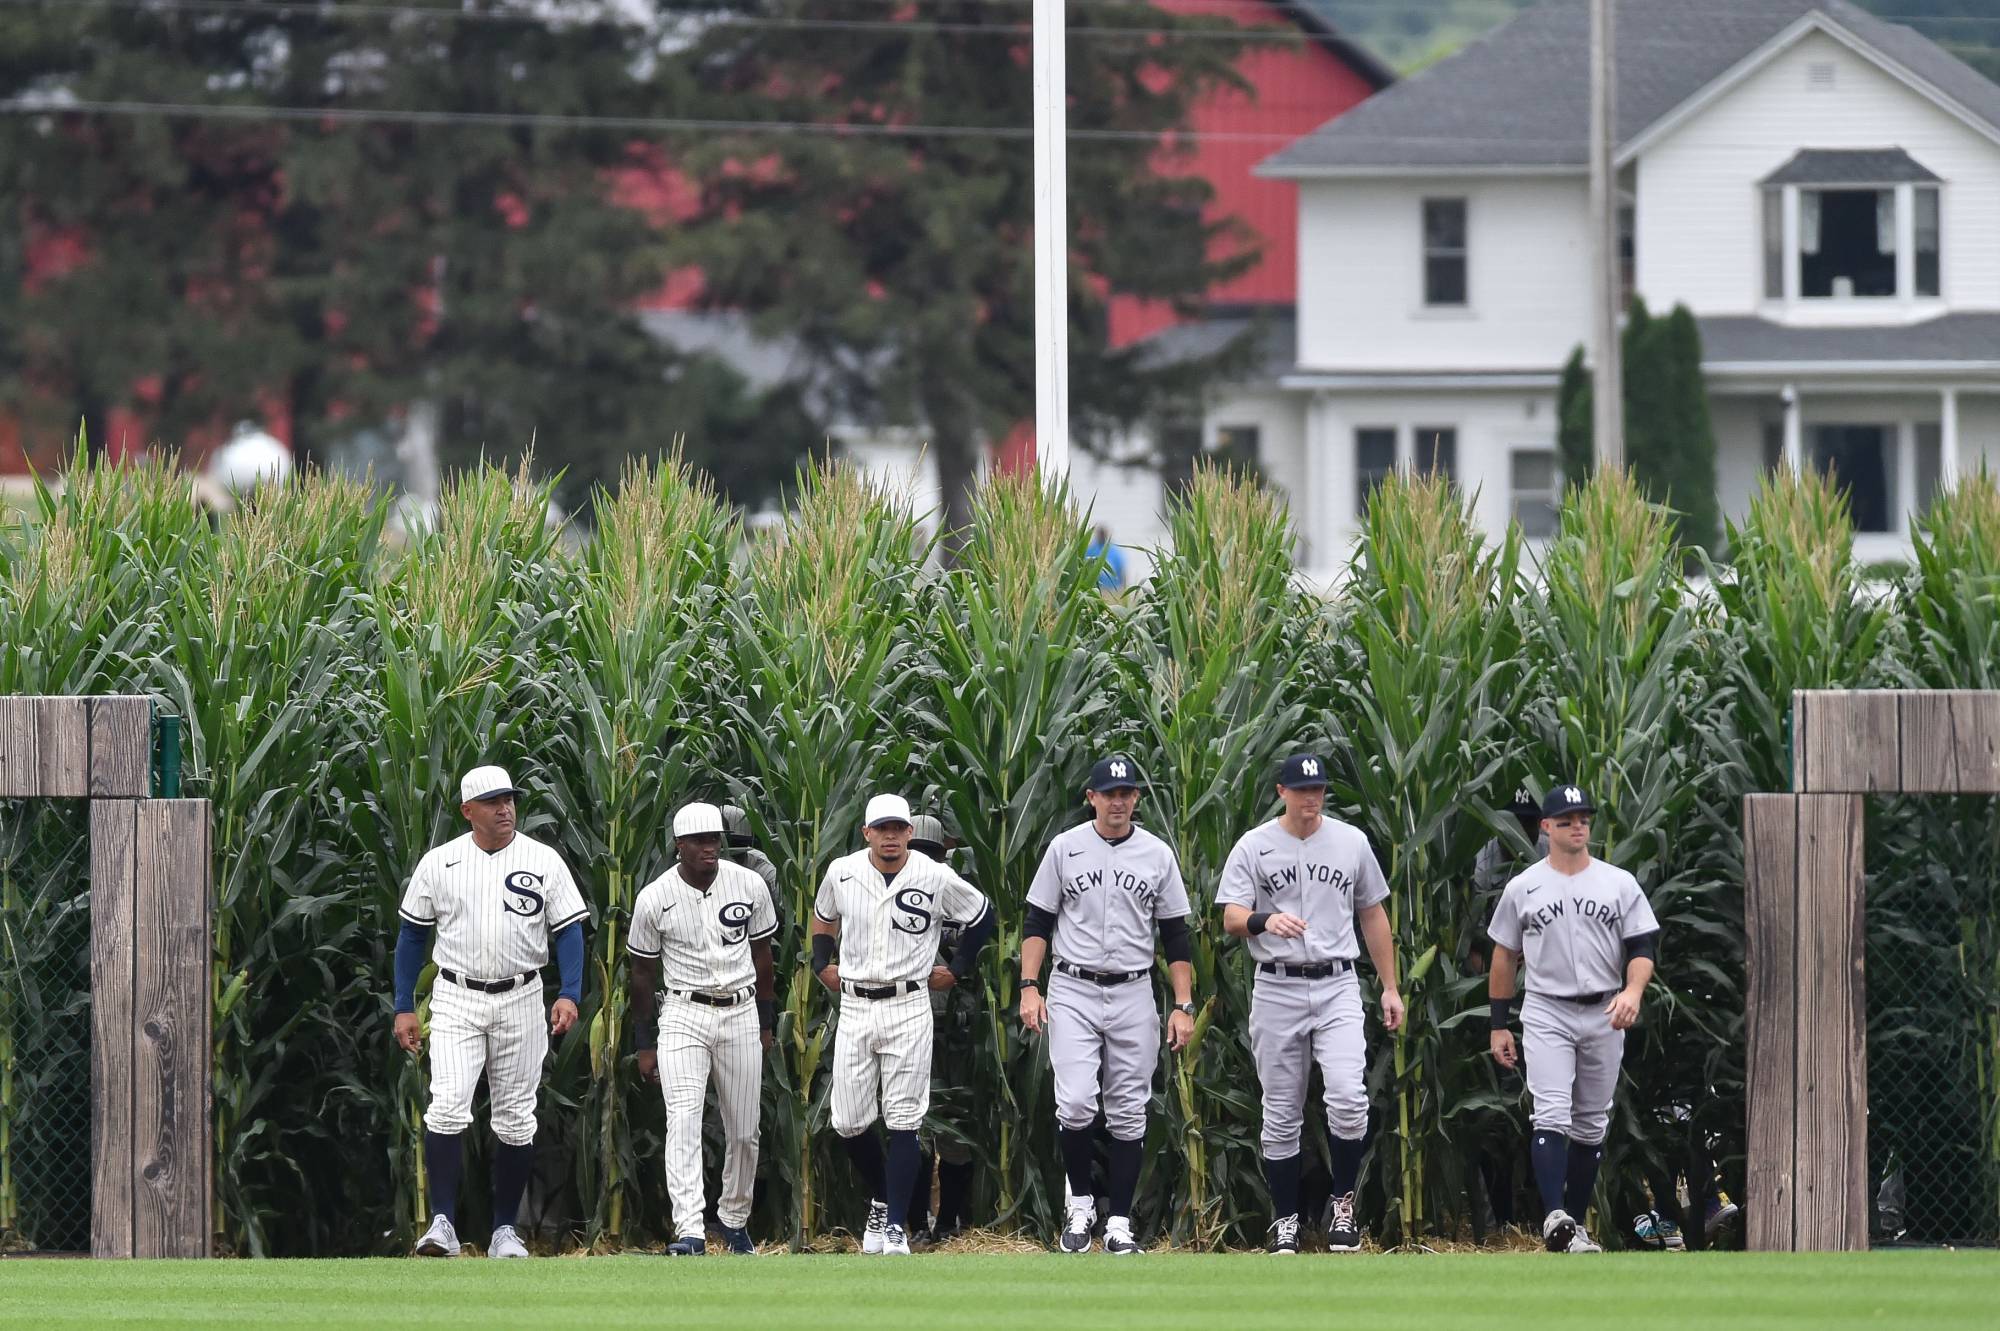 MLB will return to Field of Dreams in 2022